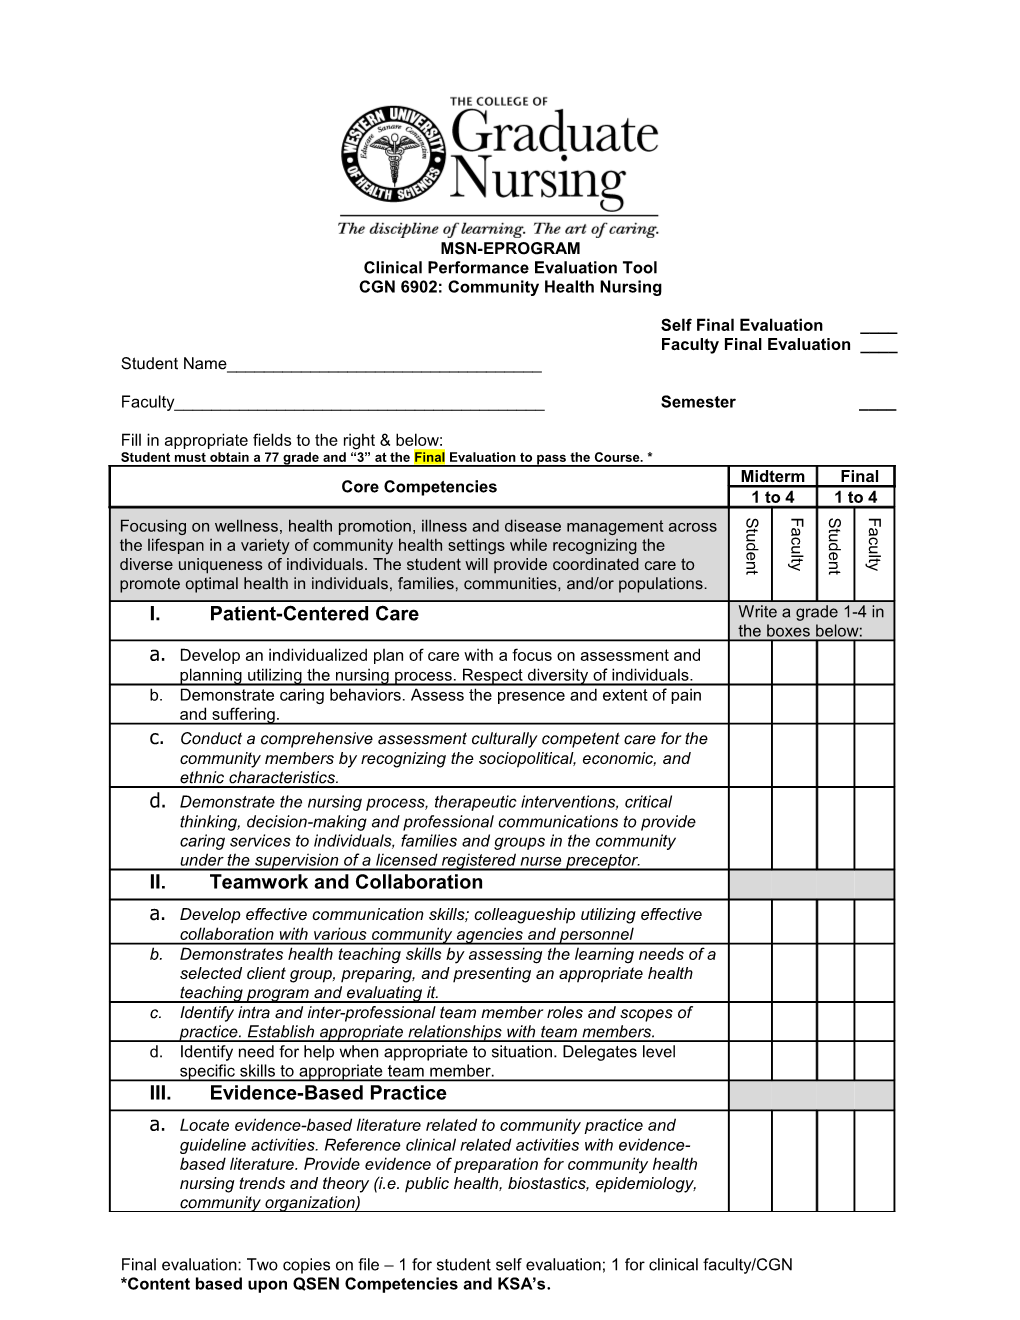 Clinical Performance Evaluation Tool